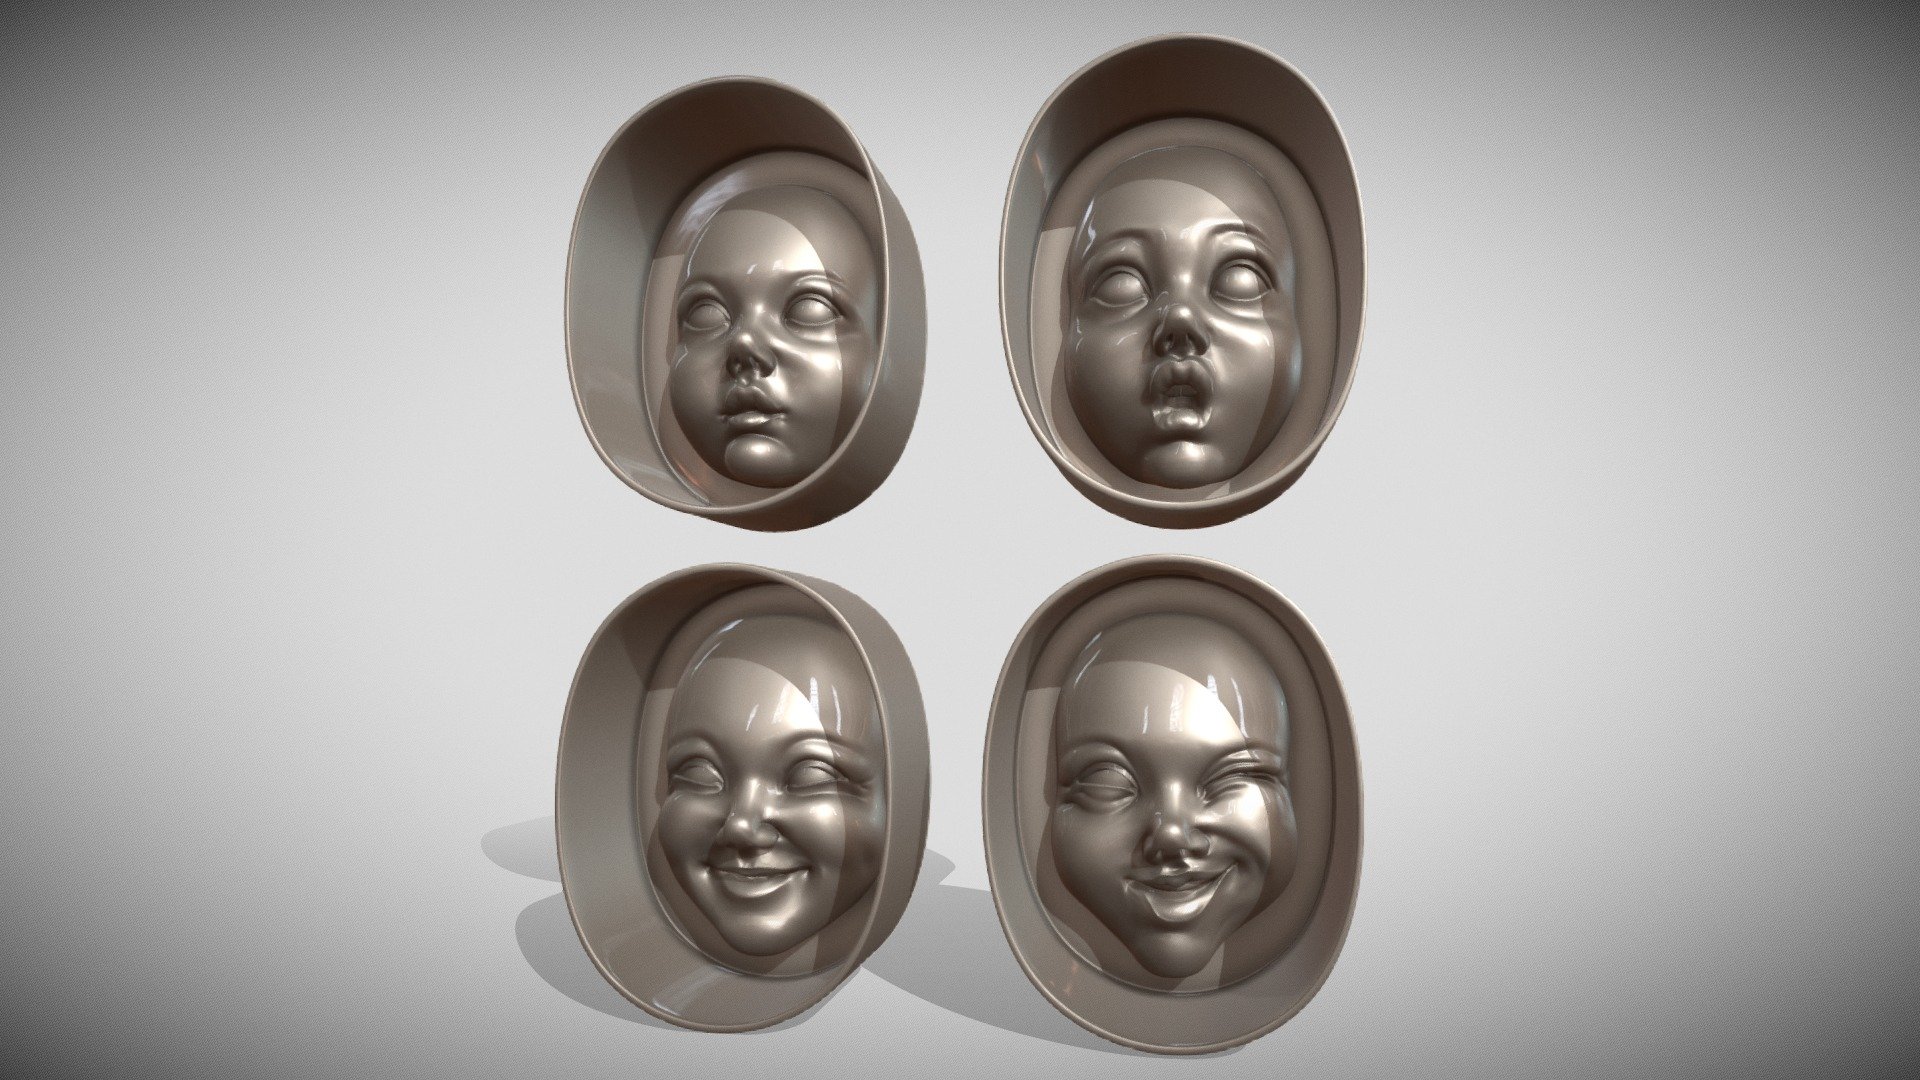 Baby face molds with different emotions for casting silicone molds, reusable, for the subsequent production of baby faces for handmade dolls or for any other creative decoration.
You just need to pour silicone into these molds and you will get ready-made durable silicone molds, filling which you can cast or sculpt faces, for example, using polymer clay, foam, or other substances that are used in this kind of work.
Attention! From these molds you do not cast the faces themselves, but silicone molds for reusable production of faces
I set the size of the molds to 40 mm, but you can change it as you need.
All models are checked, tight, have no foreign inclusions 3d model